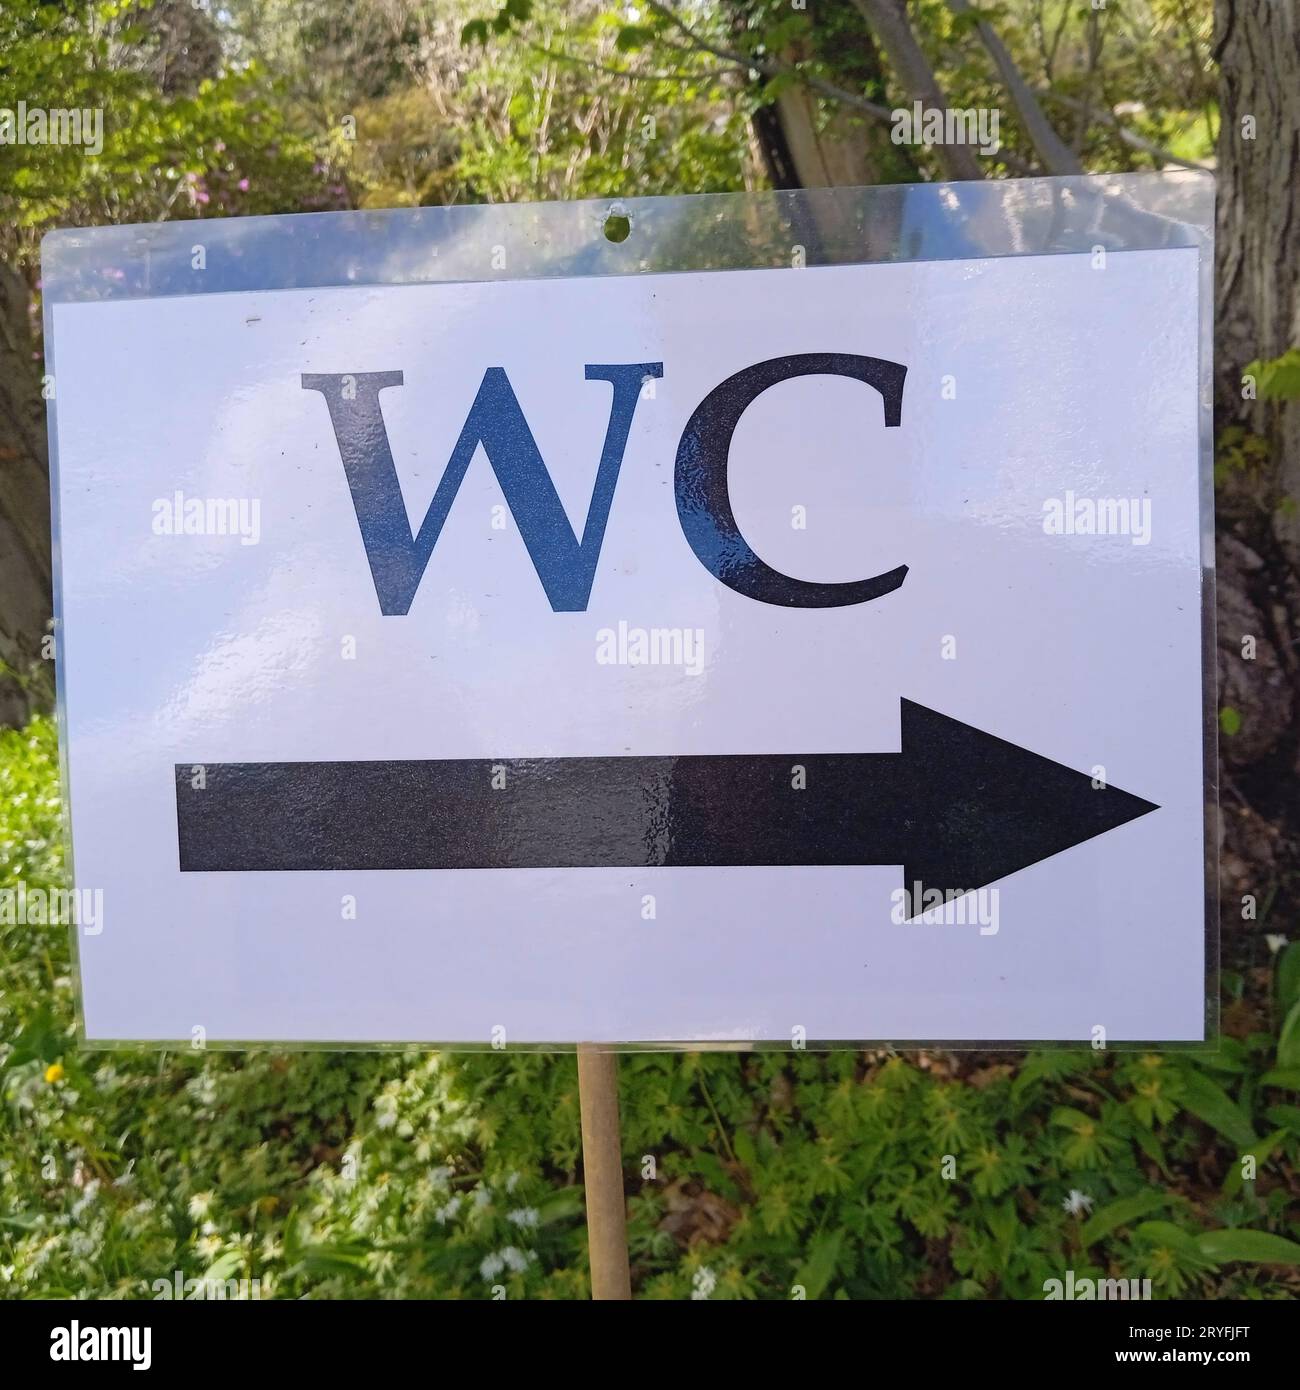 A toilet or WC sign Stock Photo